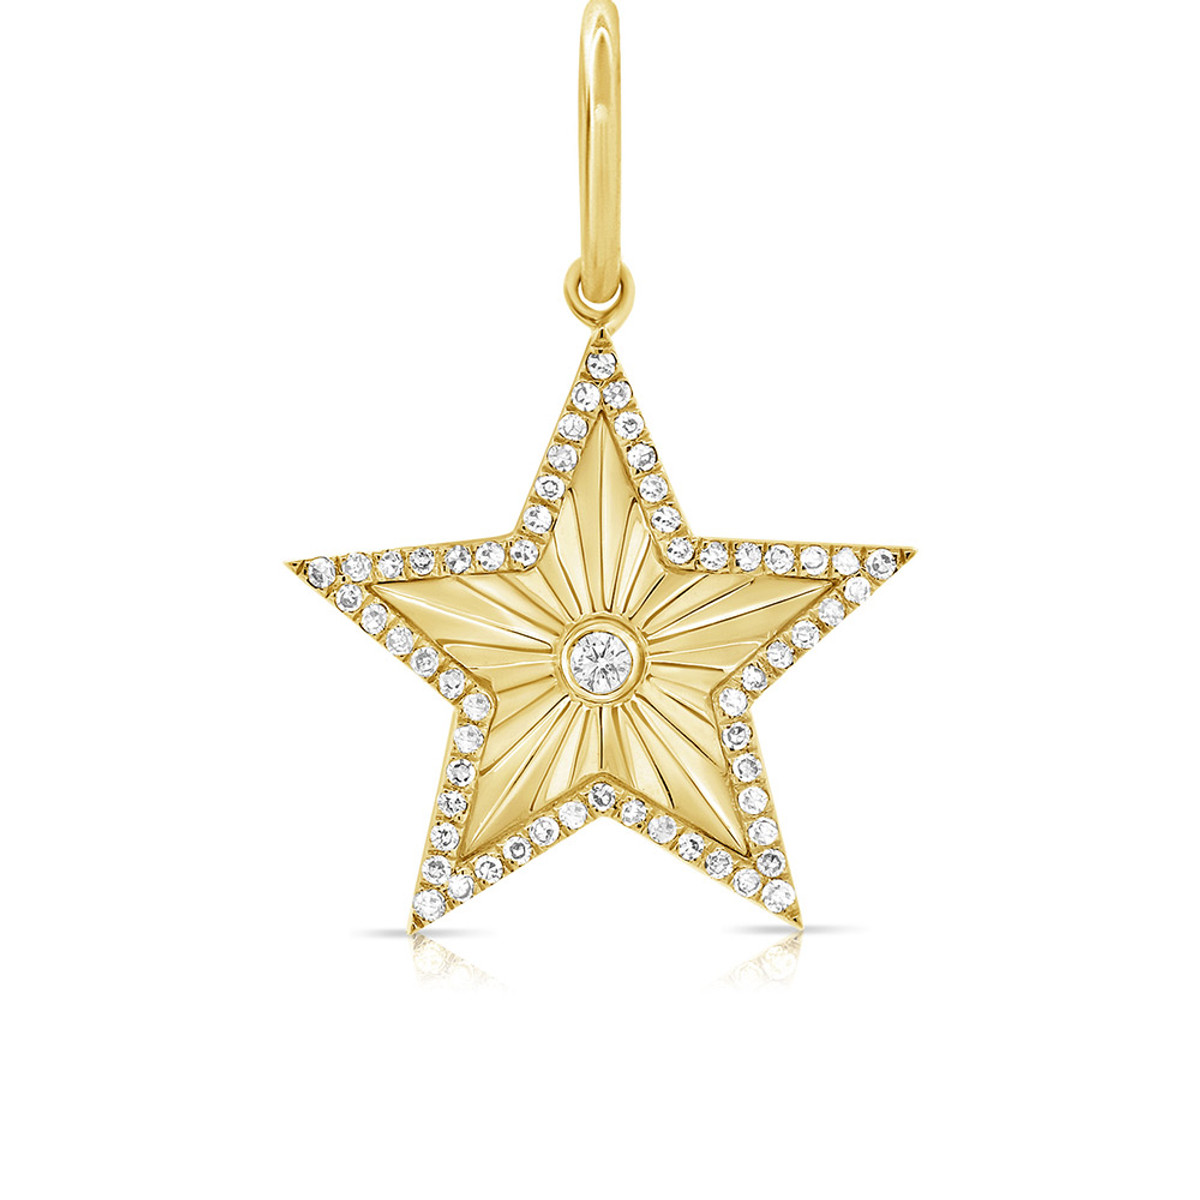 Hyde Park 14KT Yellow Gold Fluted Star Charm-26210